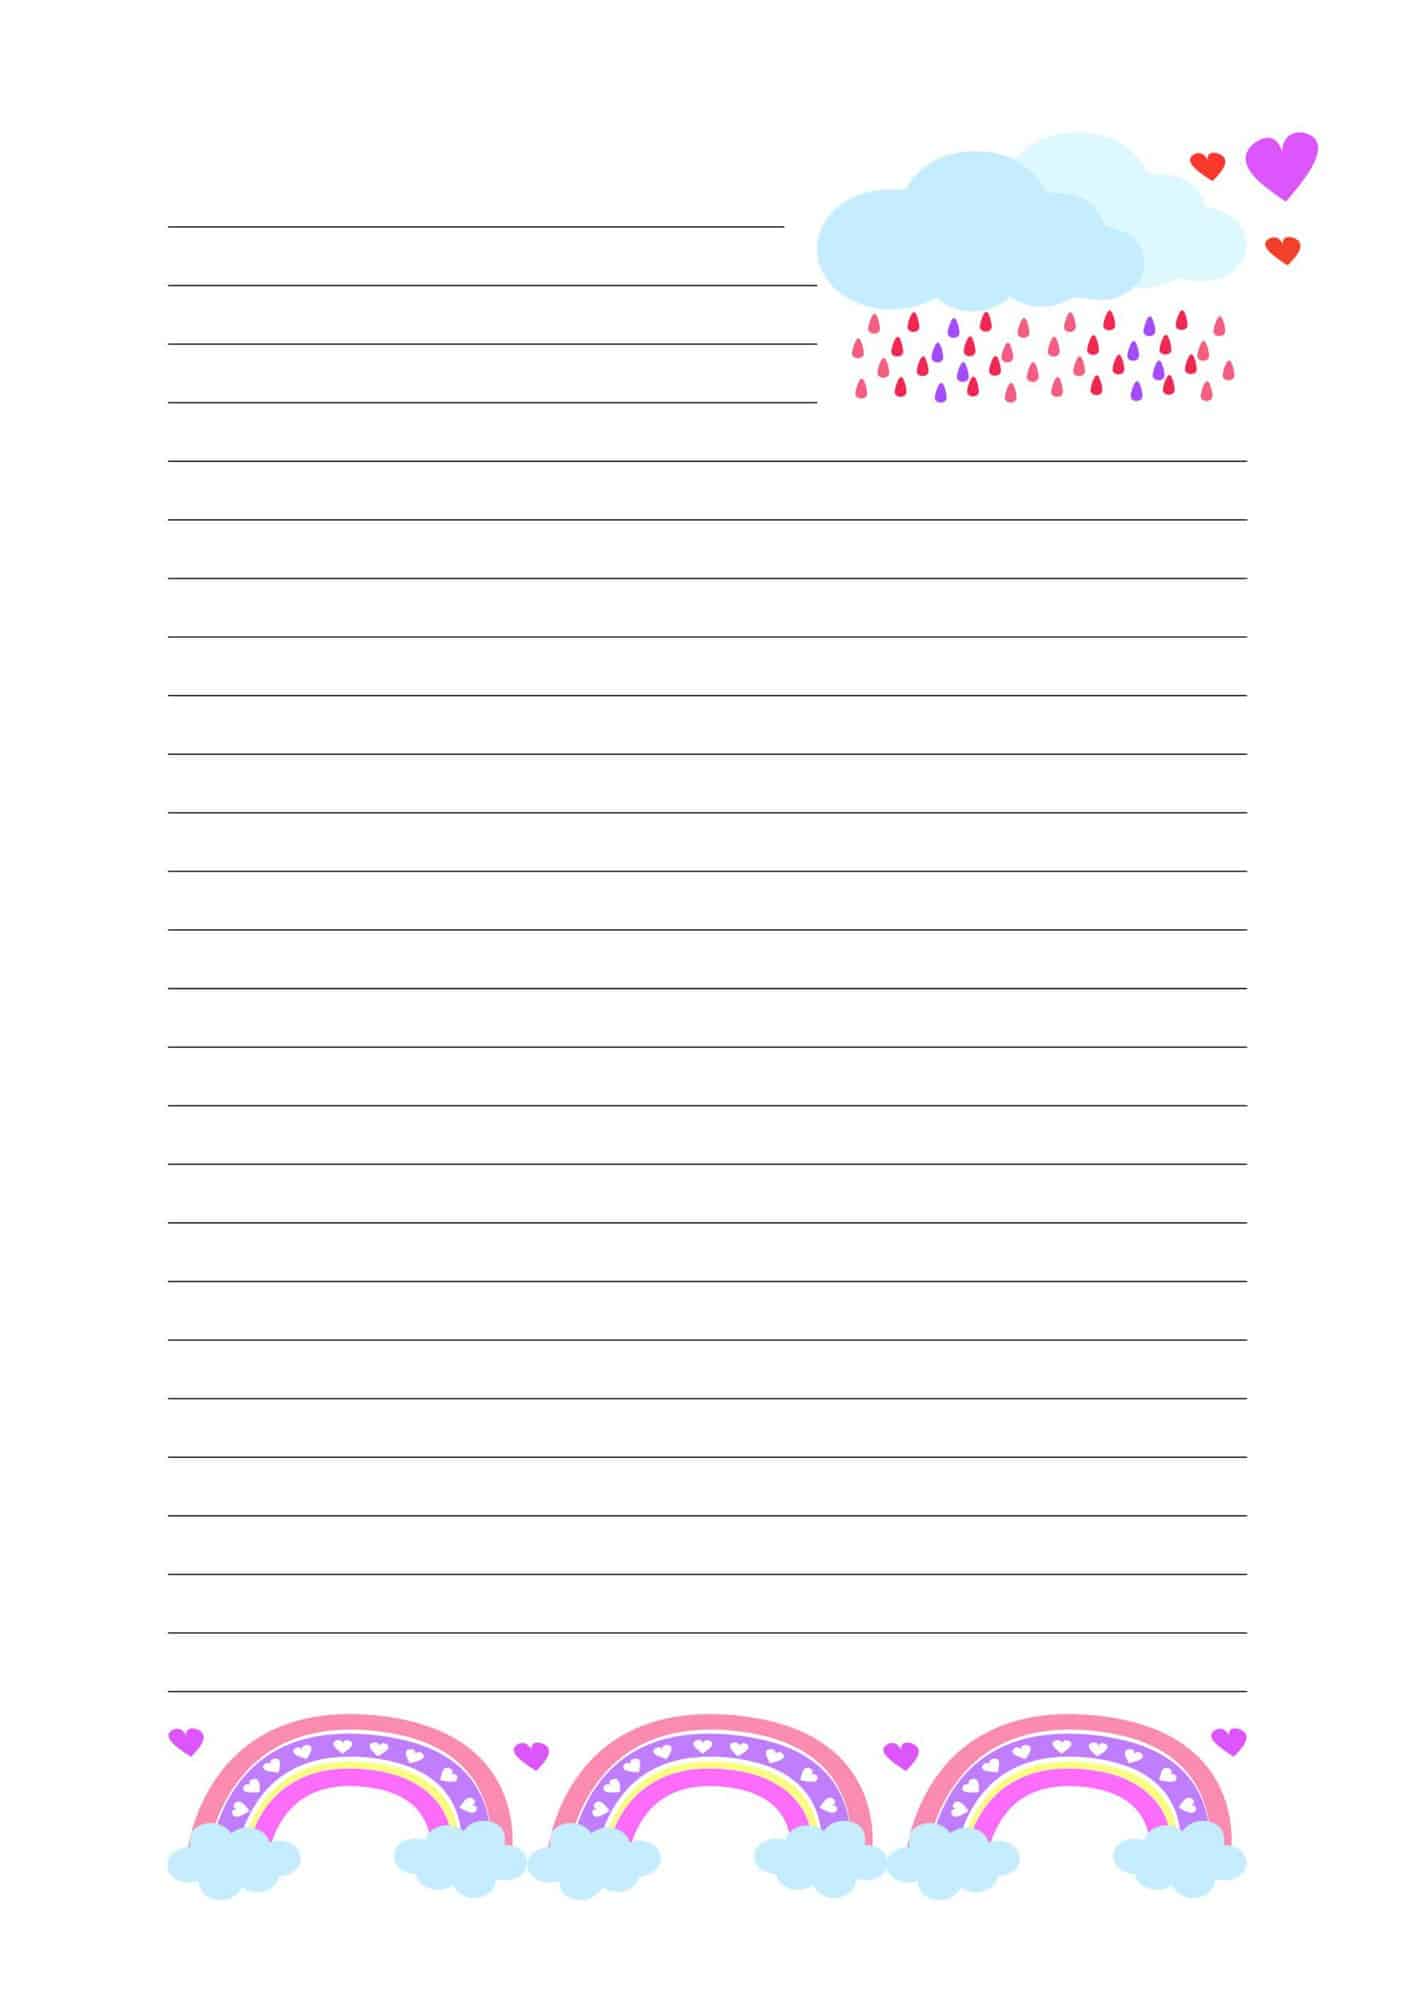 A free lined paper template with rainbow border.